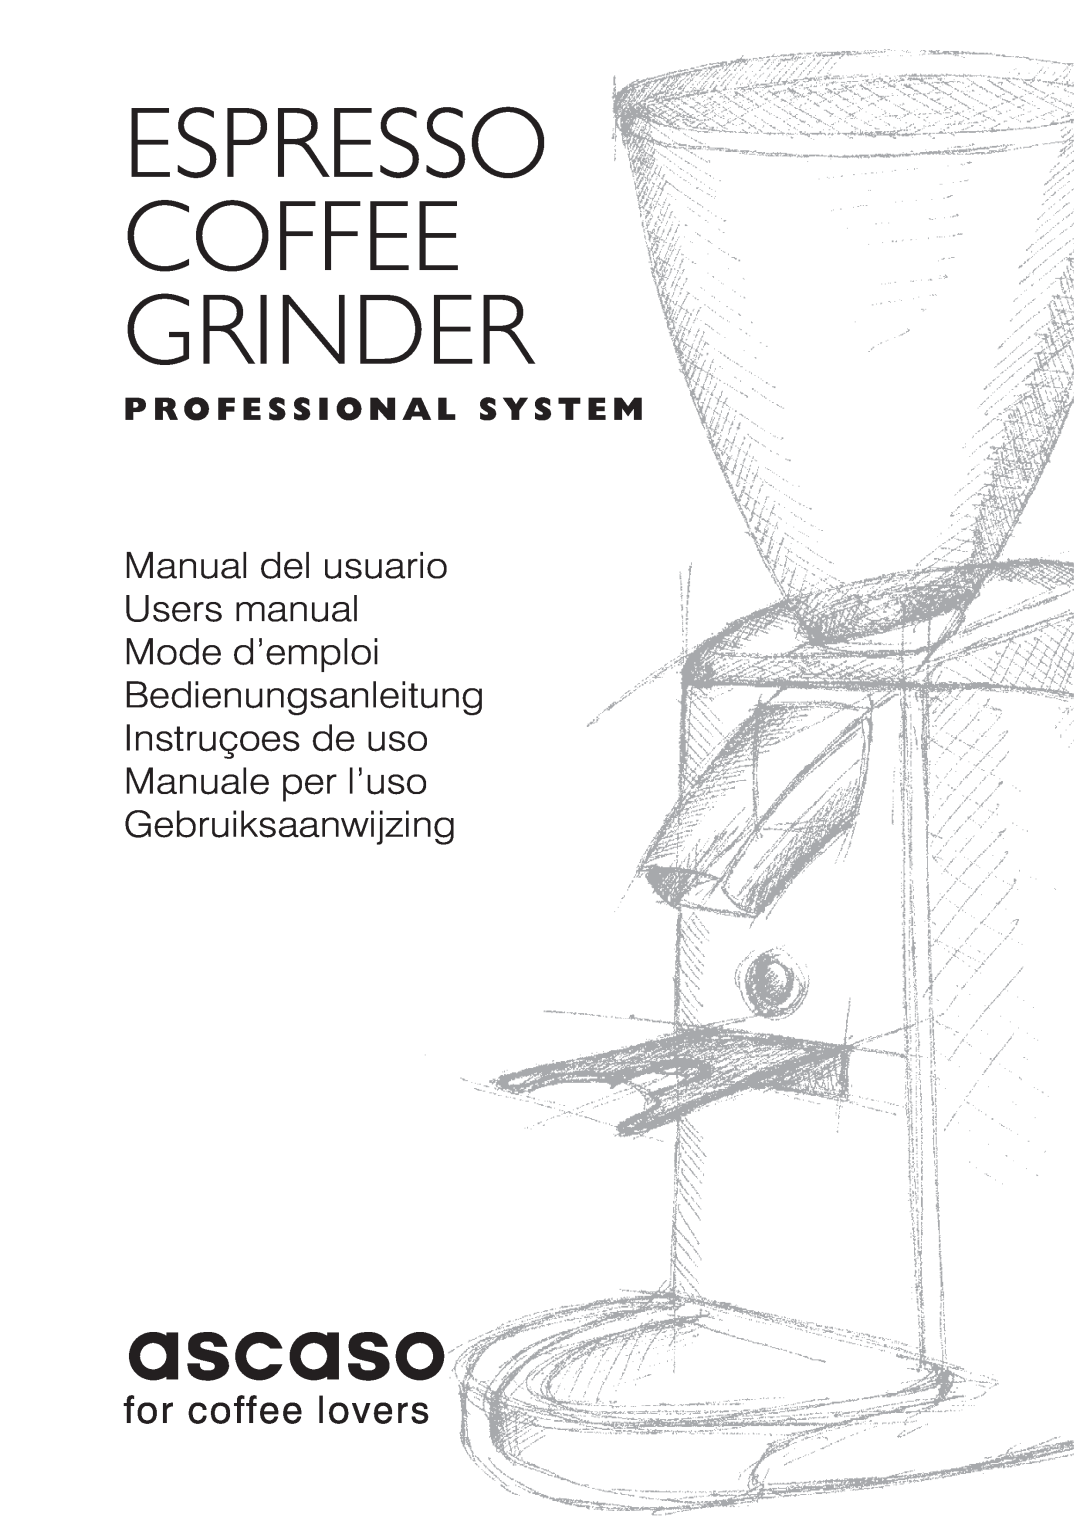 Ascaso Factory Professional System user manual Espresso Coffee Grinder, P R O F E S S I O N A L S Y S T E M 